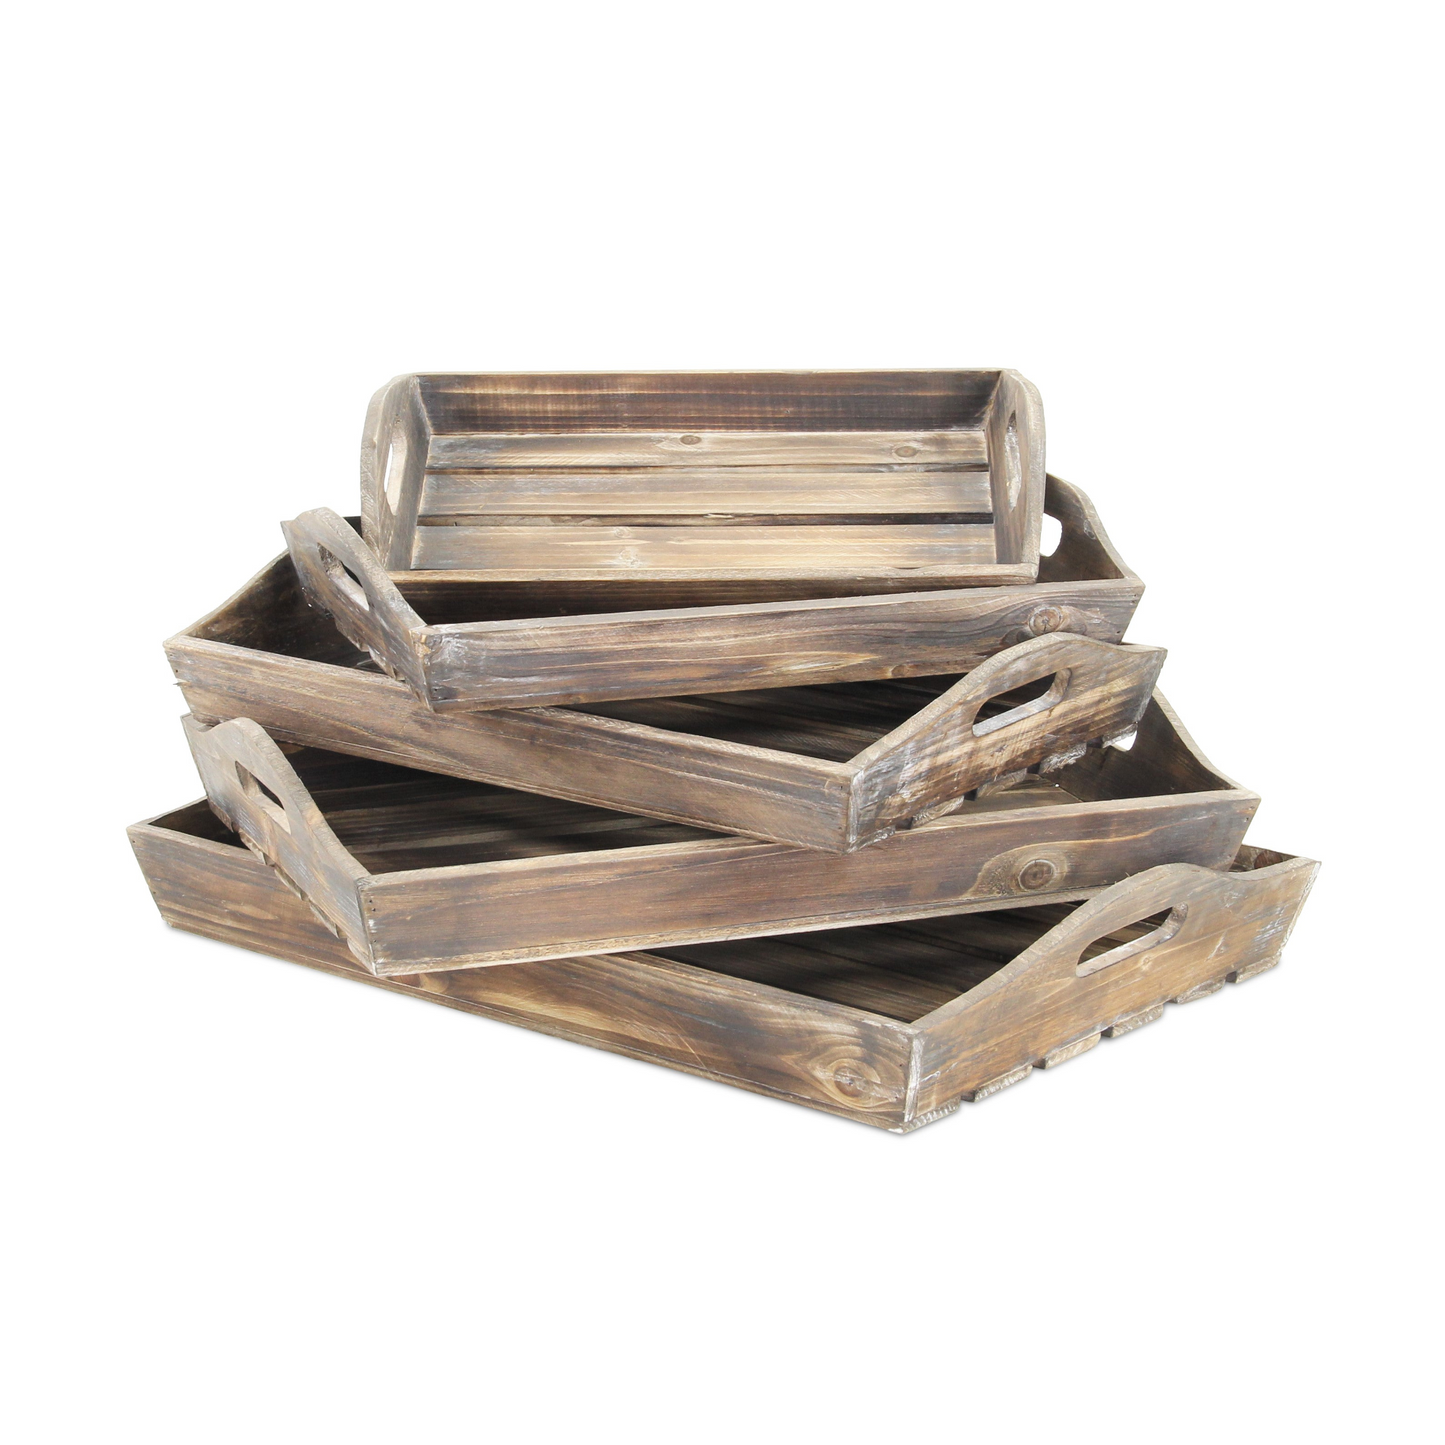 "Set Of 5 Rustic Natural Brown Wood Handmade Trays With Handles"